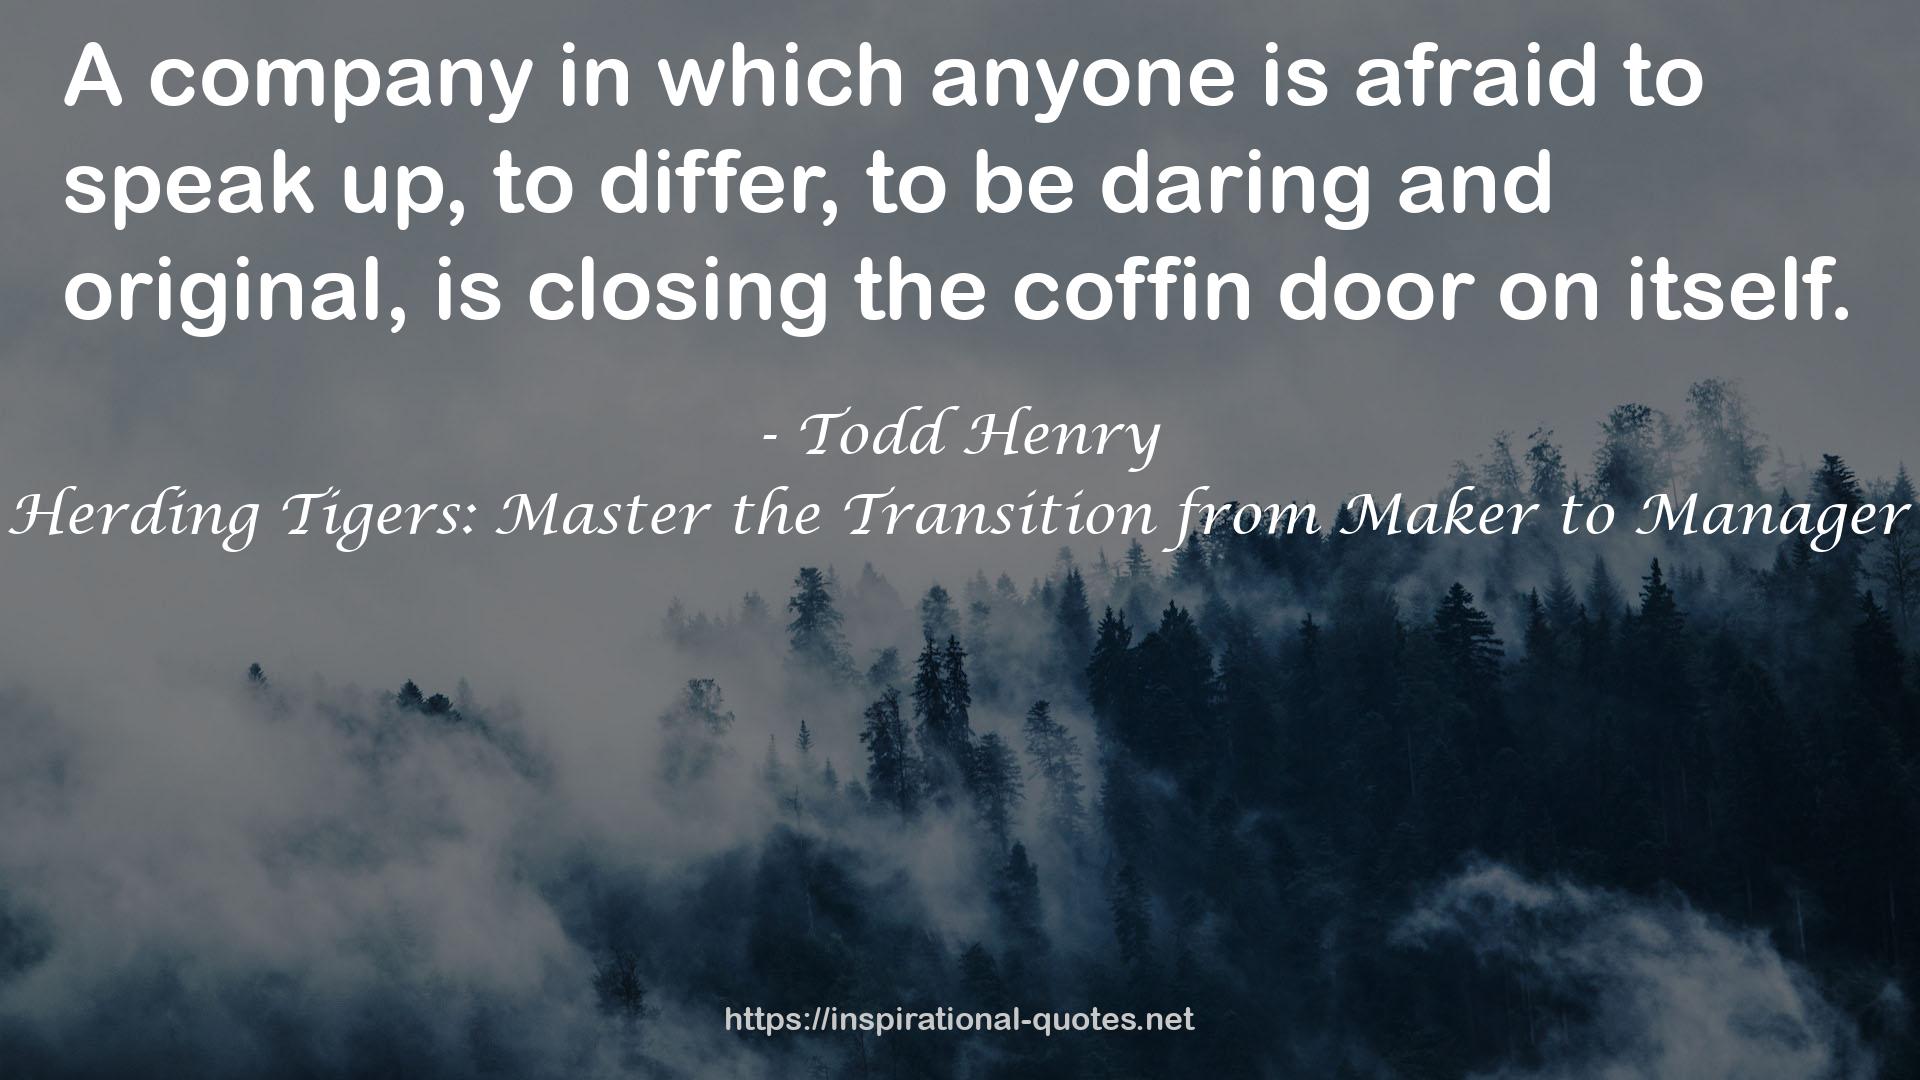 Herding Tigers: Master the Transition from Maker to Manager QUOTES